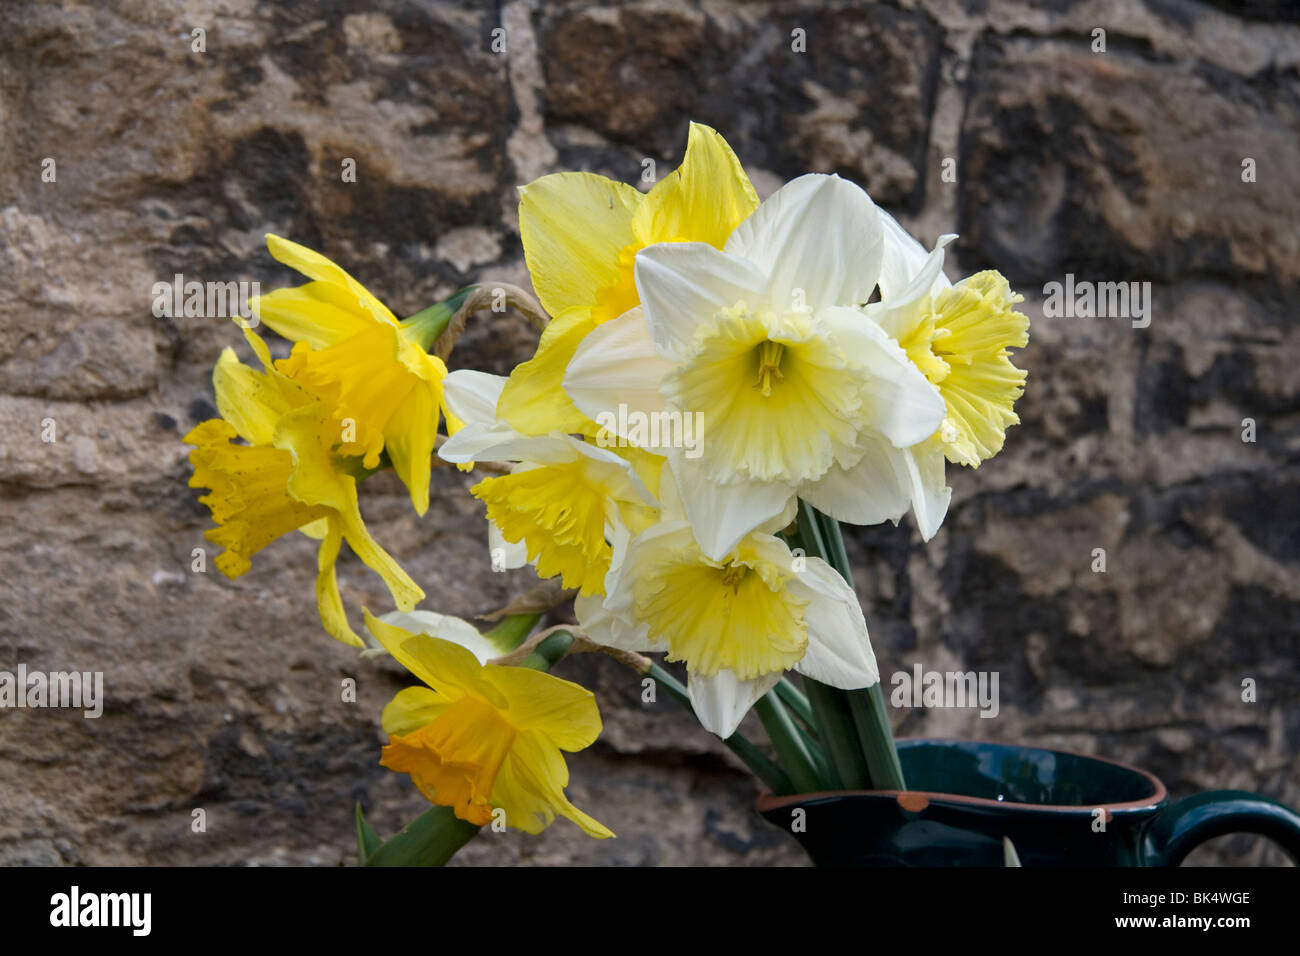 Daffodils on sale outside a house Stock Photo